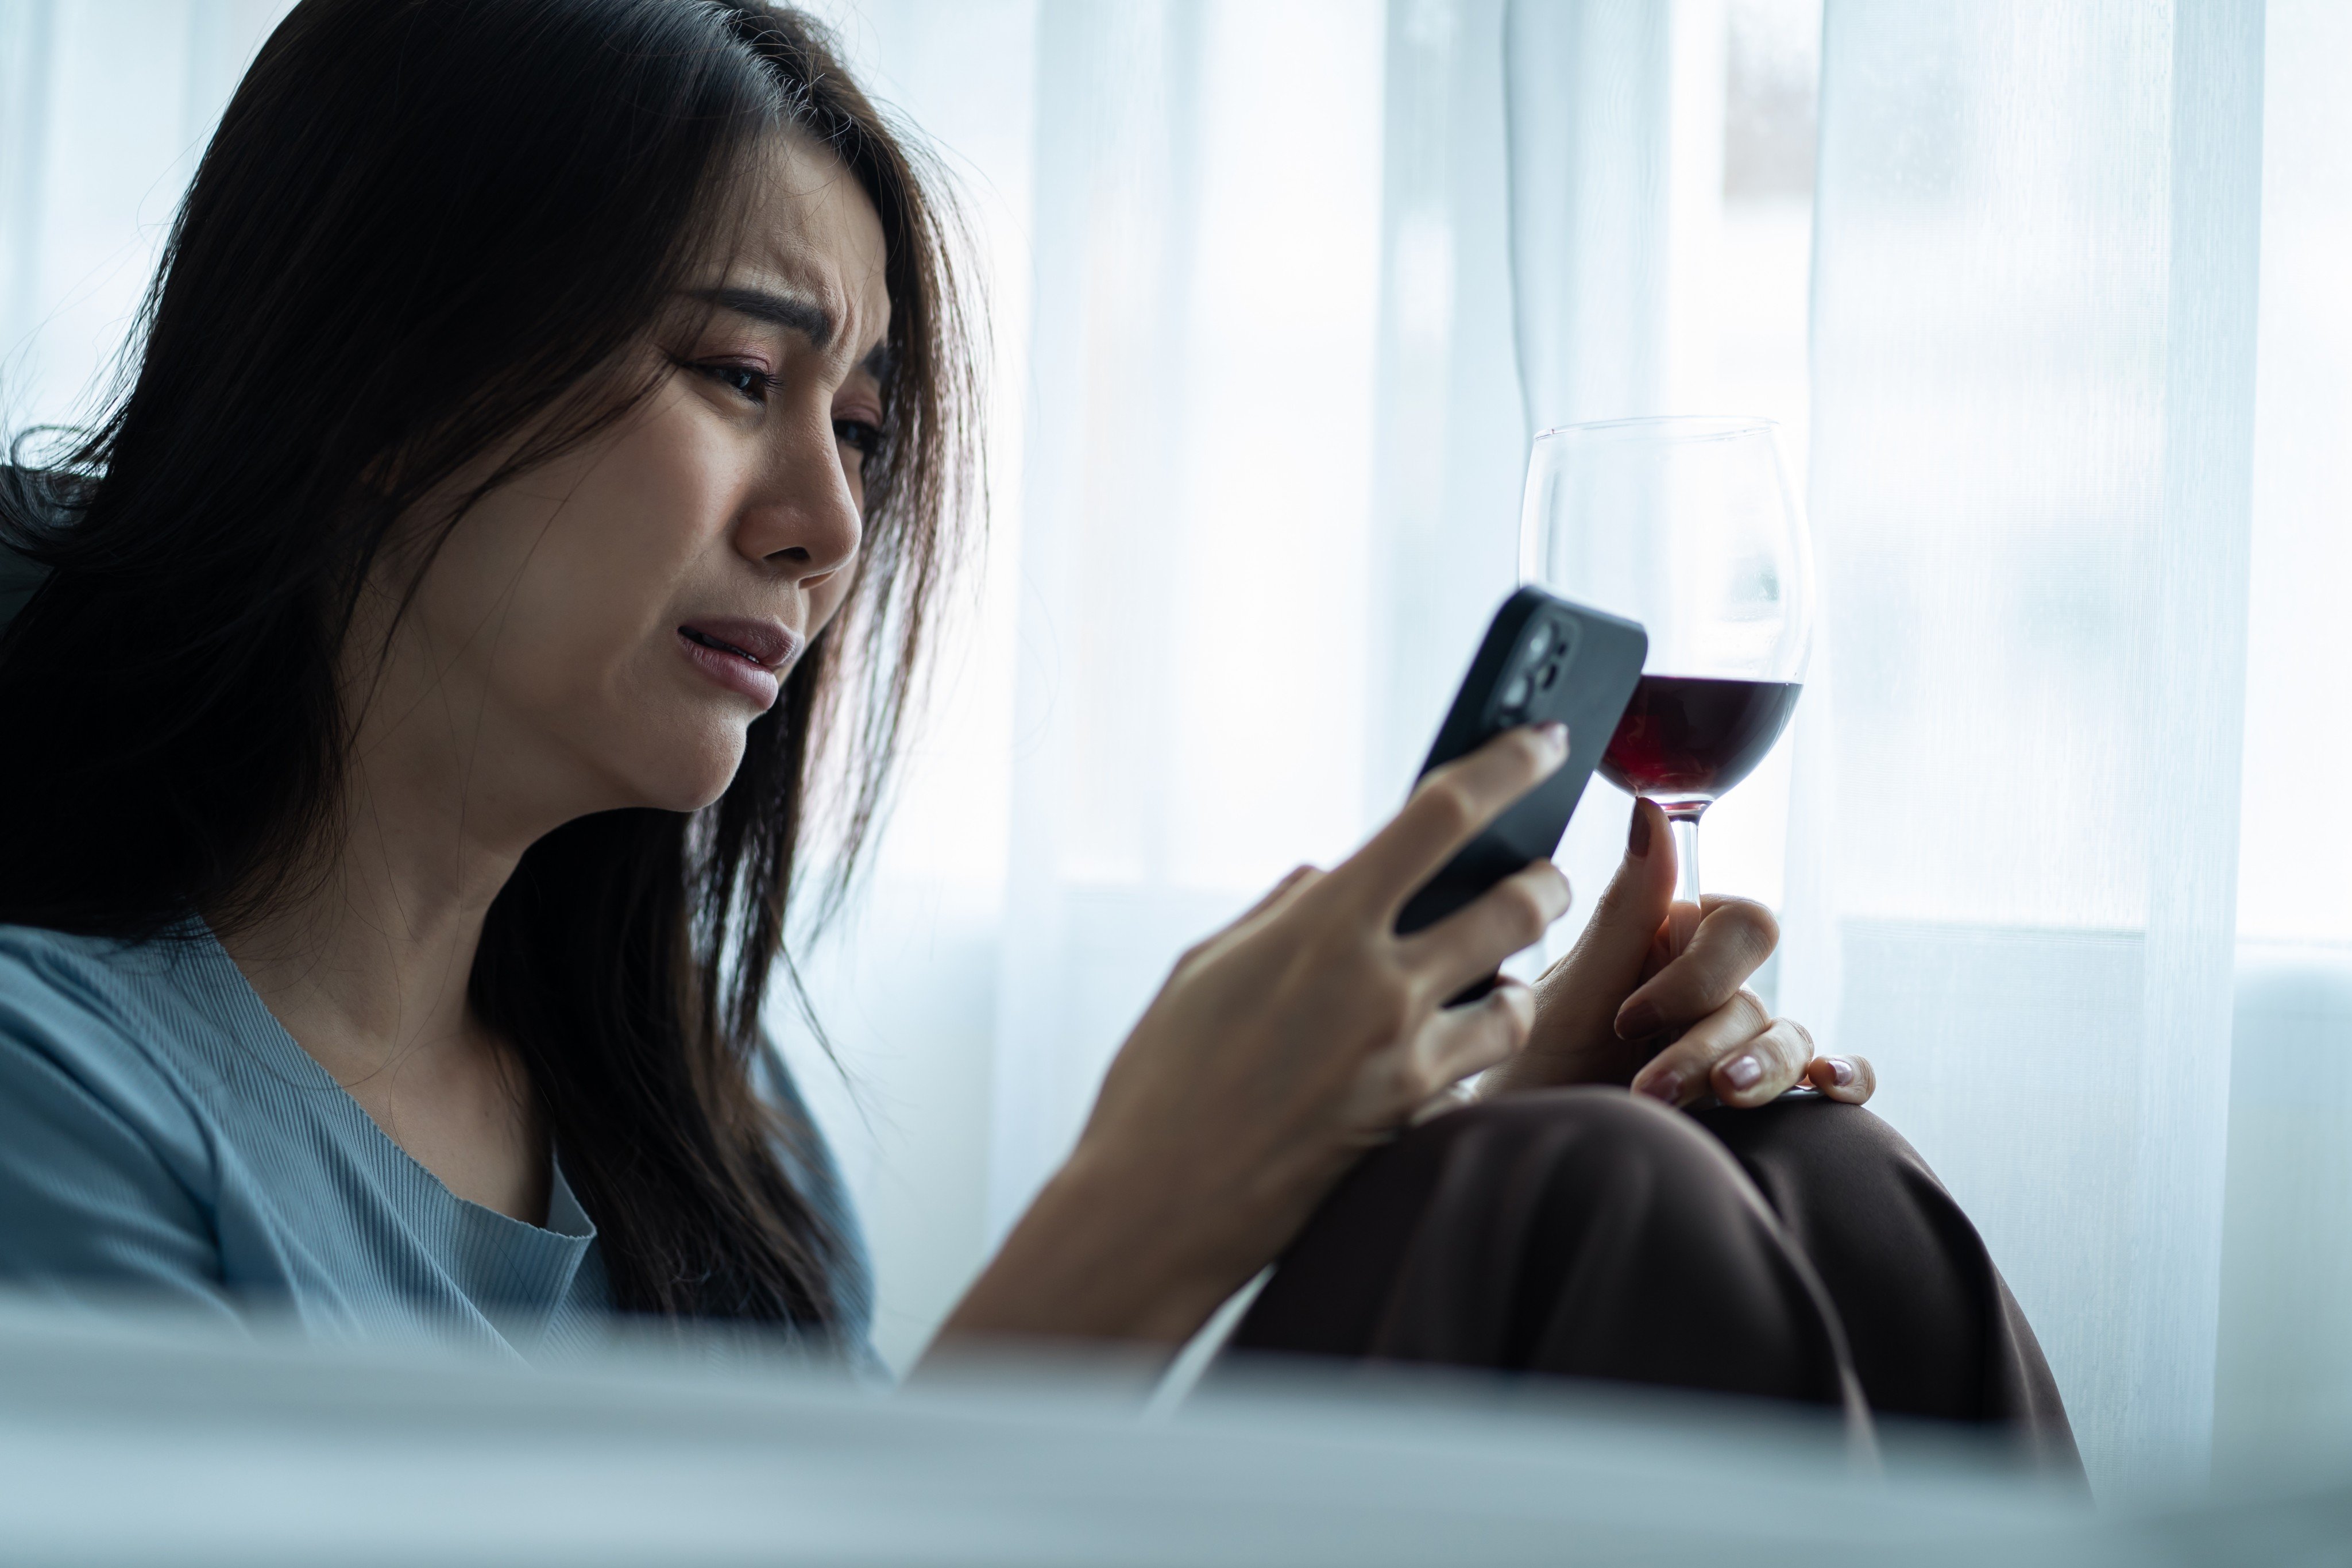 While the wife had consented to baring her chest during a video call, she did not consent to her husband taking a screenshot of her or sending the picture to anyone else, the court heard. Photo: Shutterstock